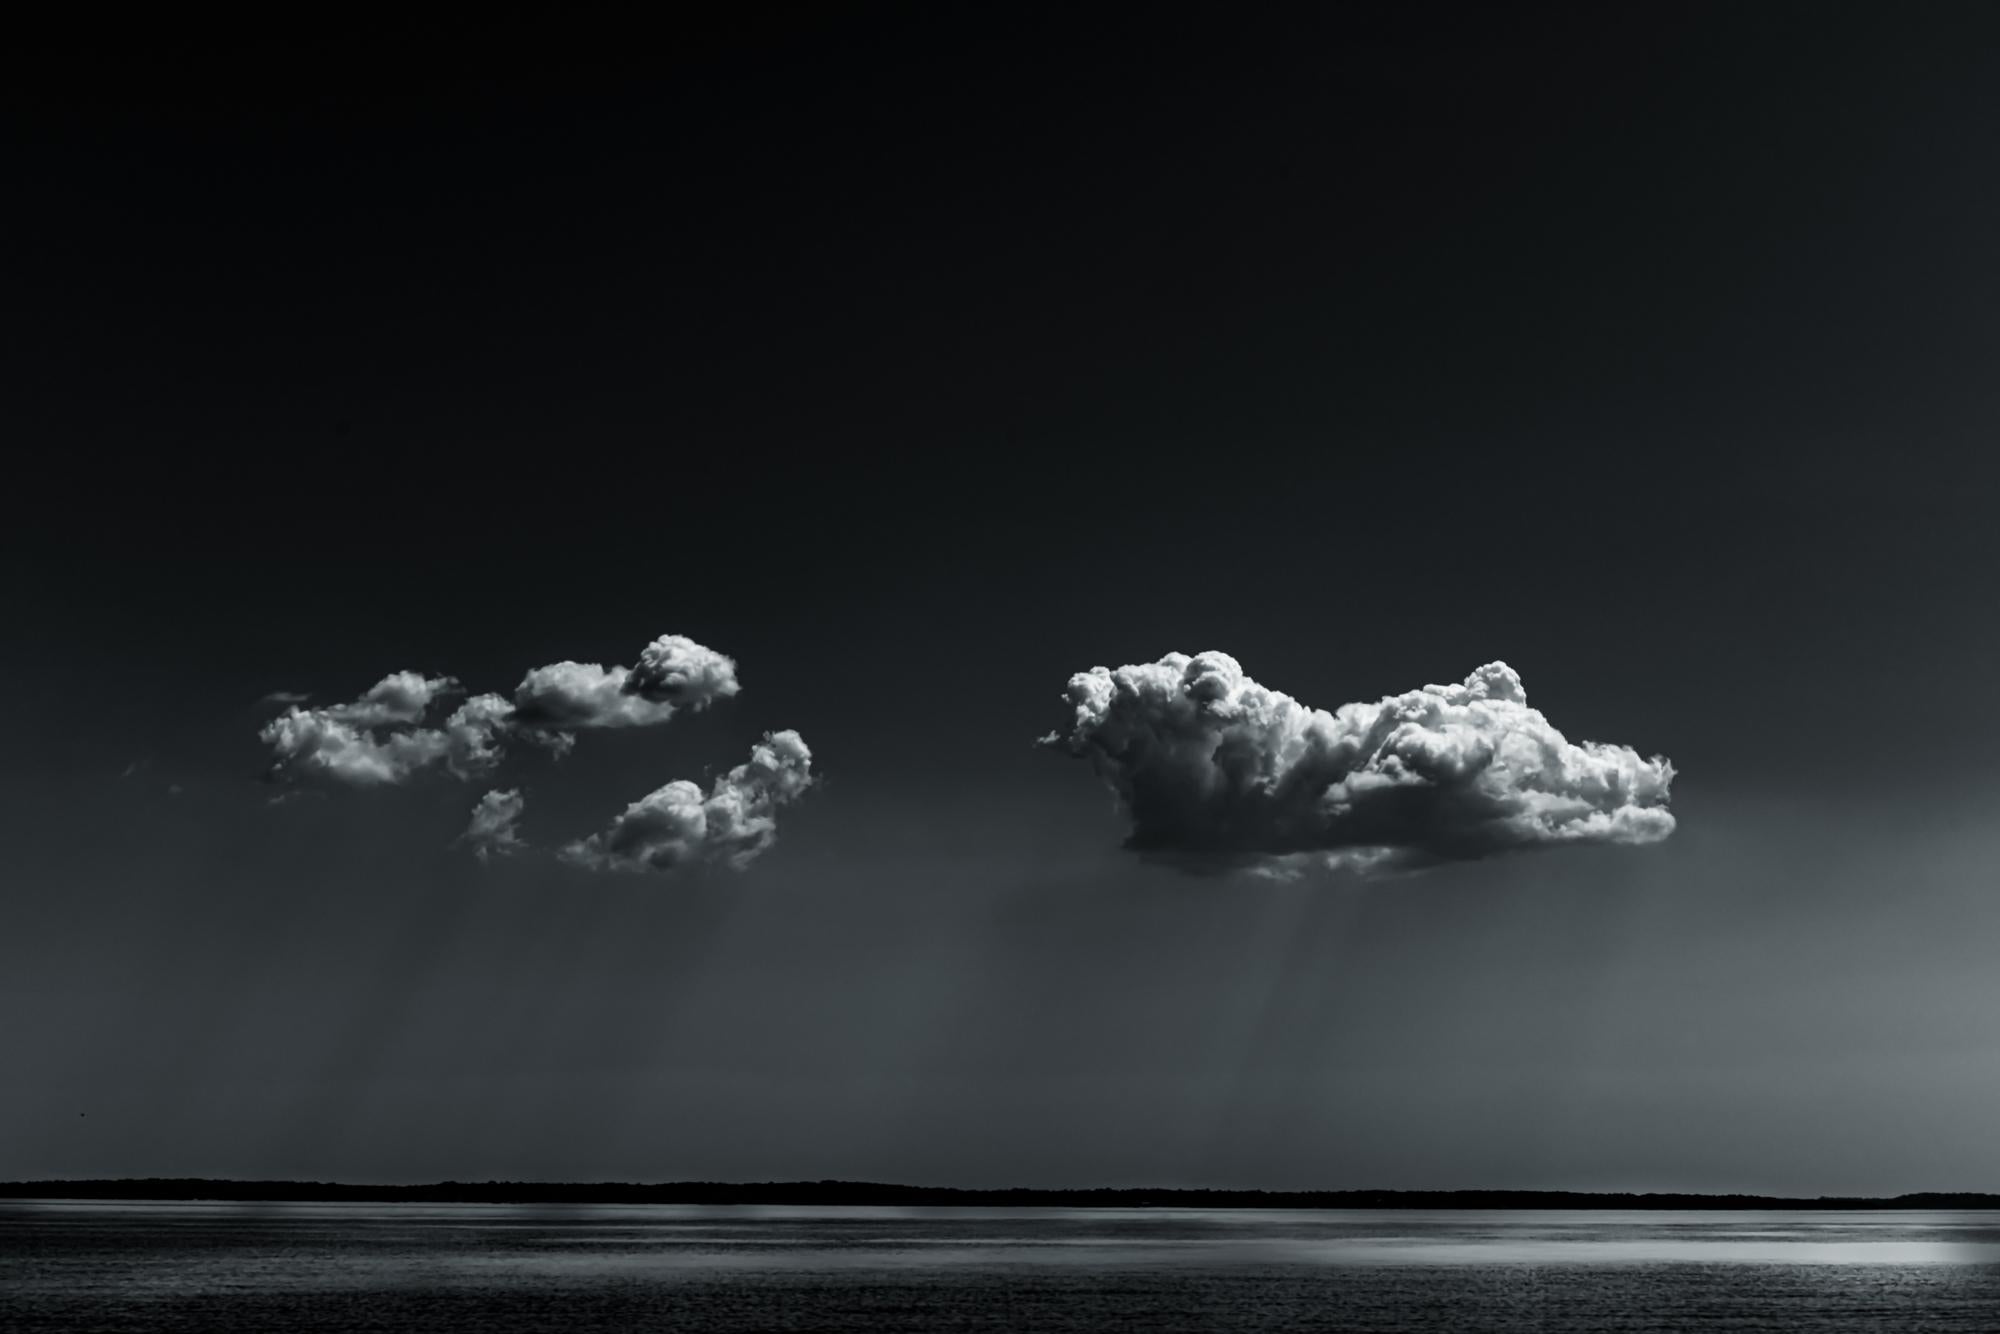 Howard Lewis Landscape Photograph - Limited Edition Black and White Photograph - " Sea Clouds #1 "